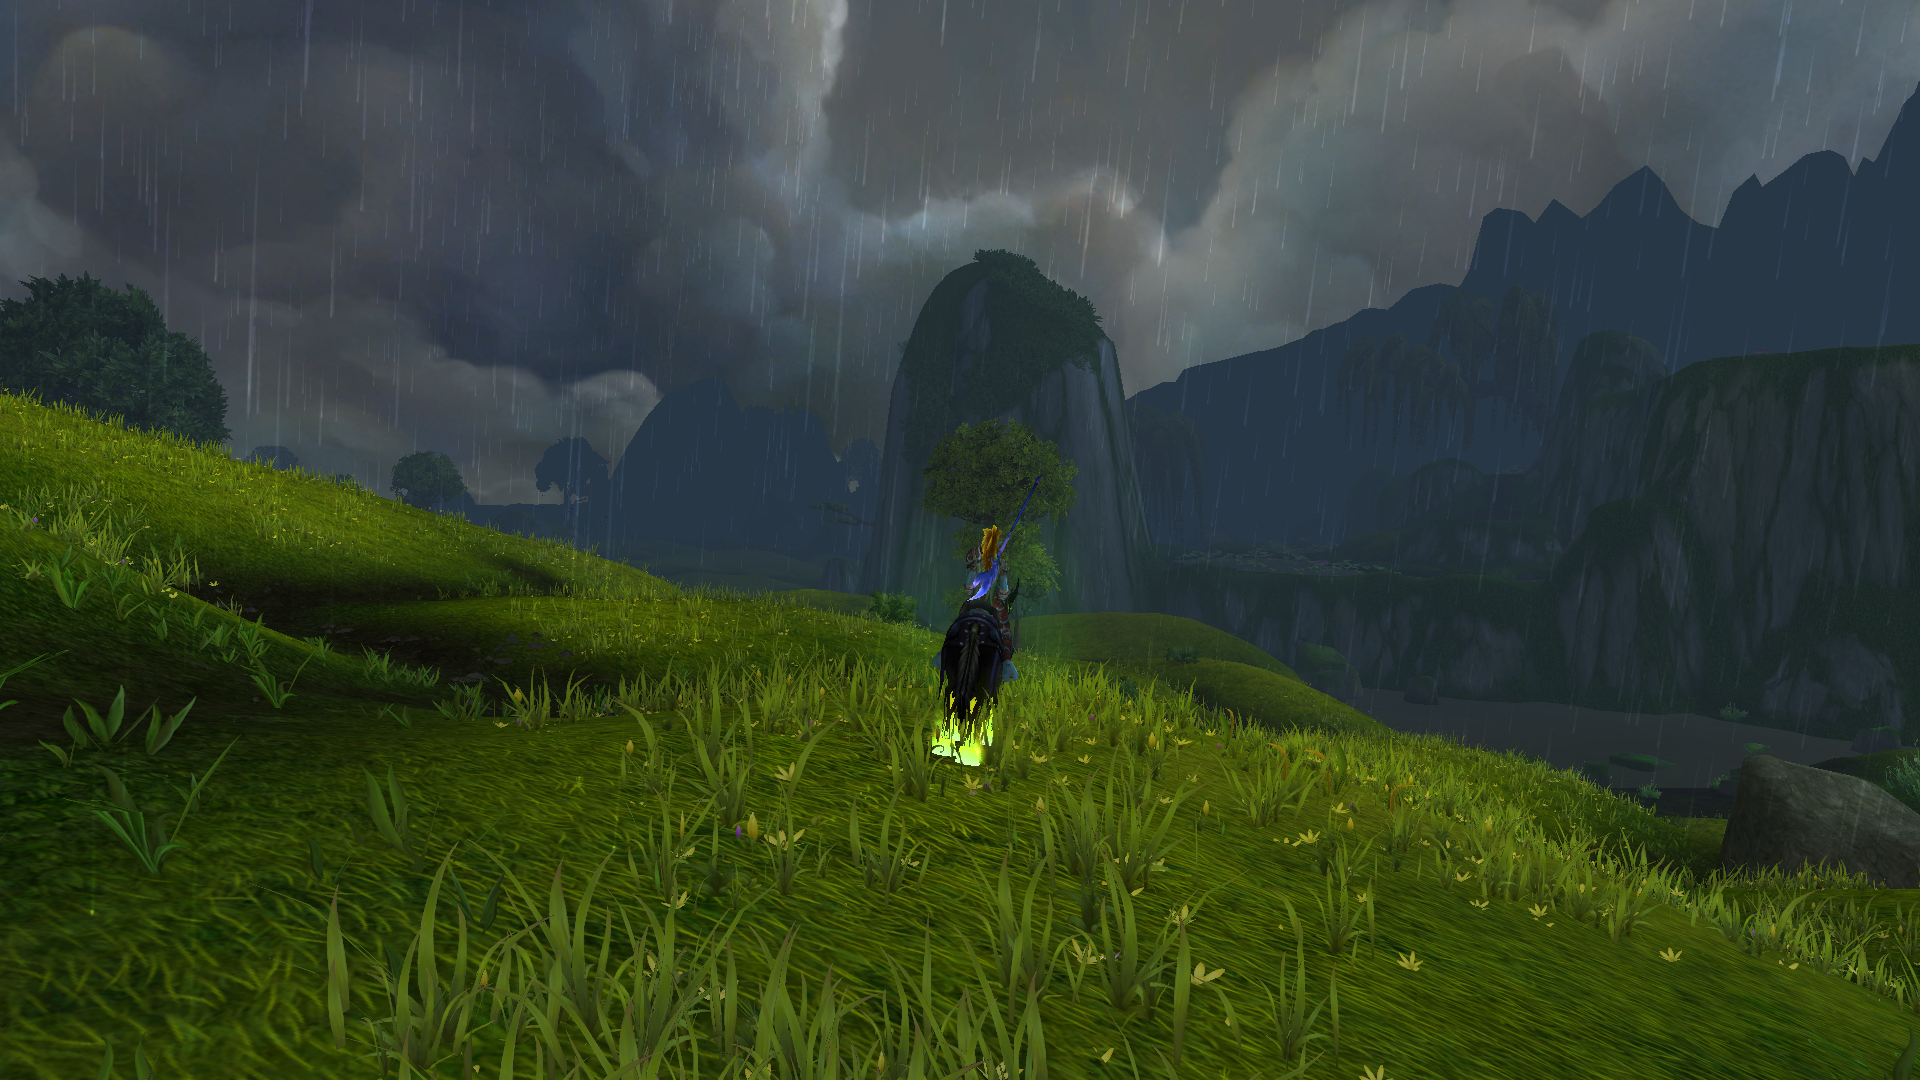 A rainy day in the Valley of the Four Winds